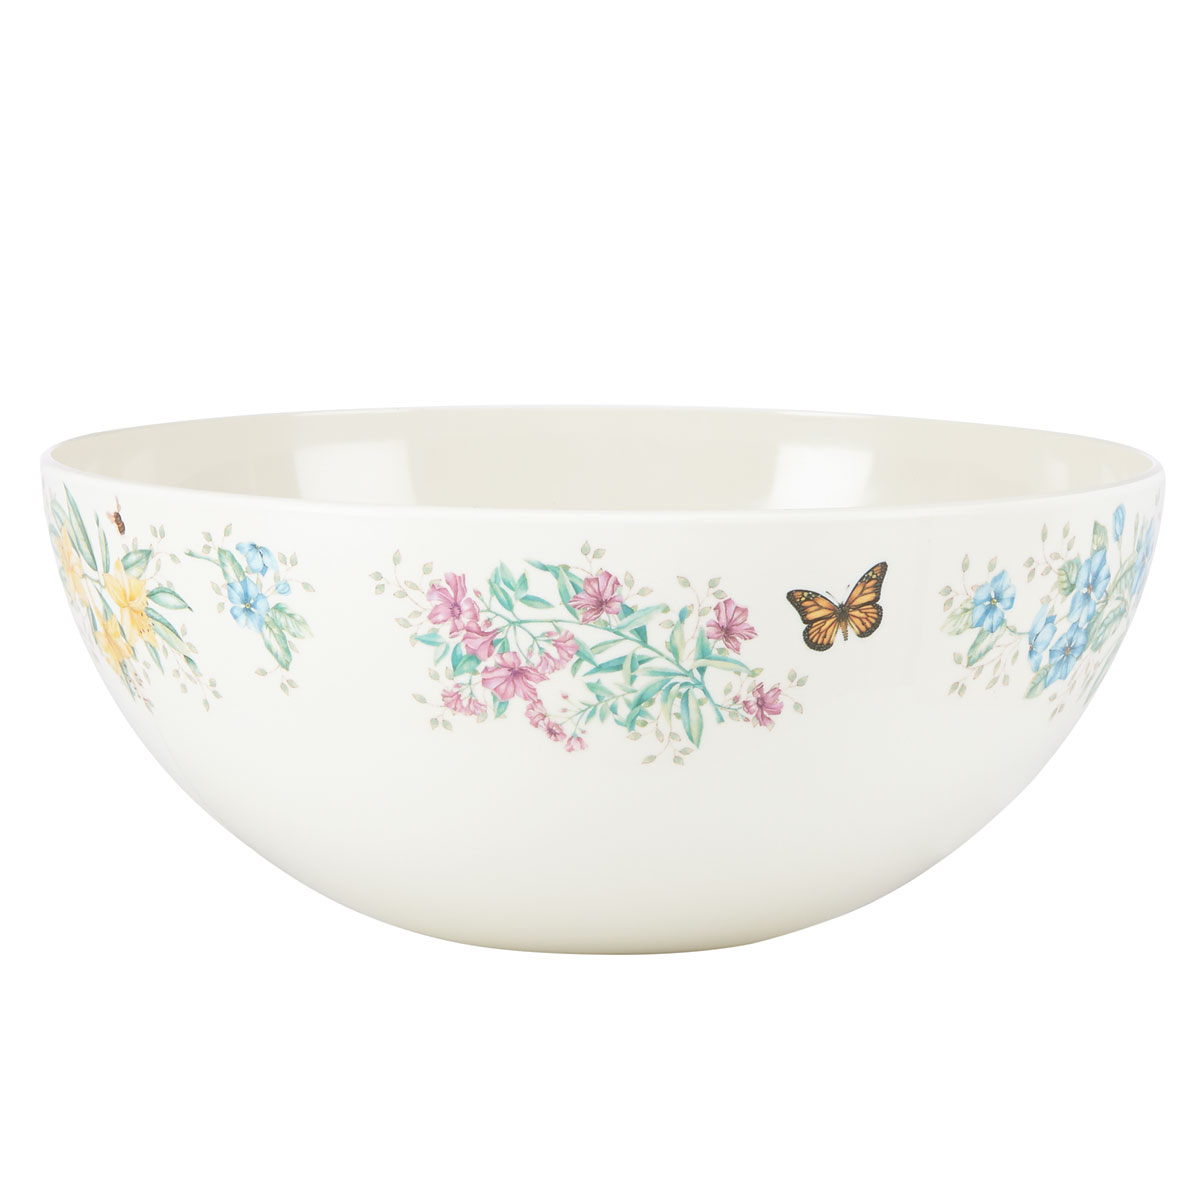 Lenox Butterfly Meadow Melamine China Salad Bowl Md